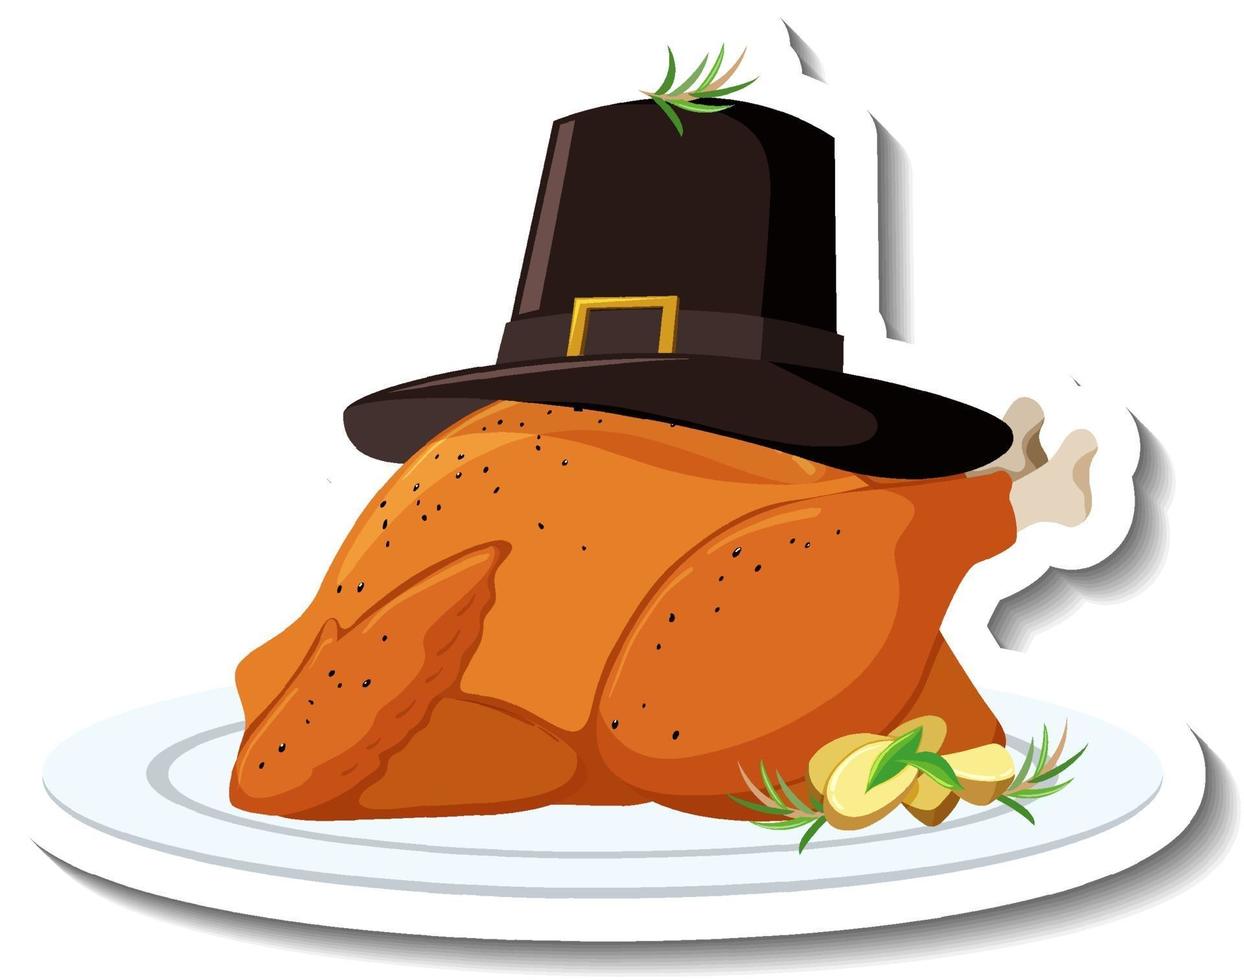 Roasted chicken on a plate with hat vector